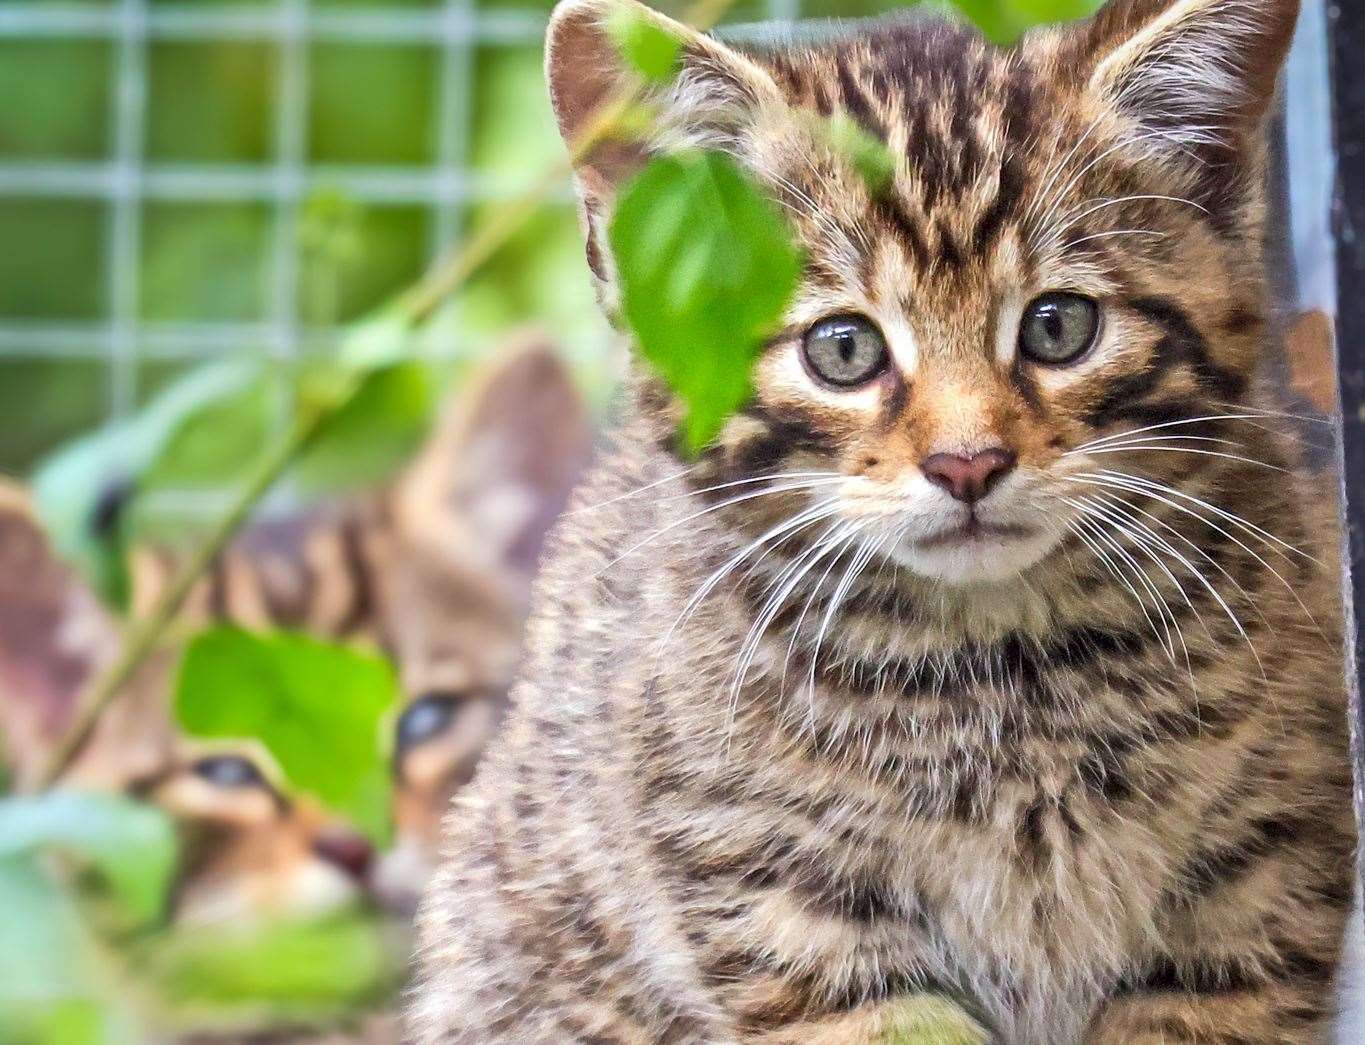 One of the wildcat kittens at Wildwood, near Herne Bay. Picture: Dave Butcher